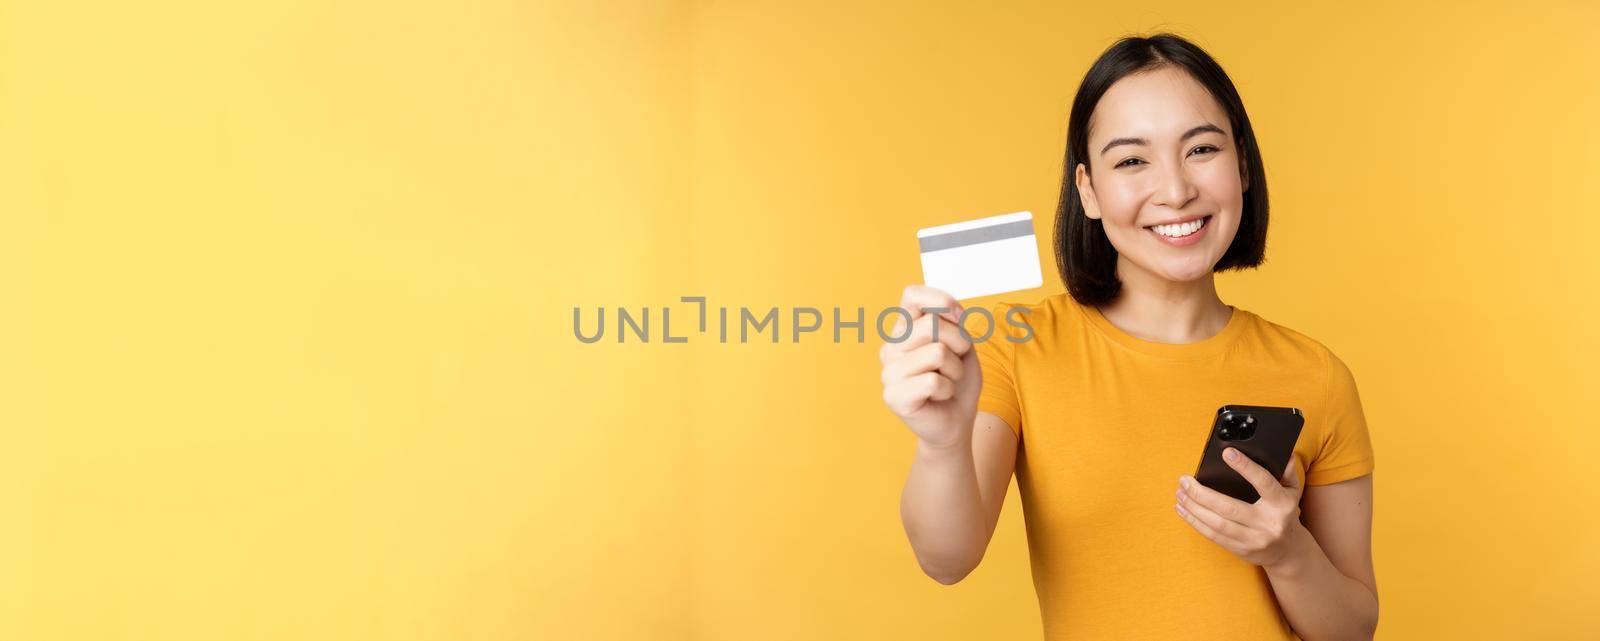 Joyful asian girl smiling, showing credit card and smartphone, recommending mobile phone banking, standing against yellow background.